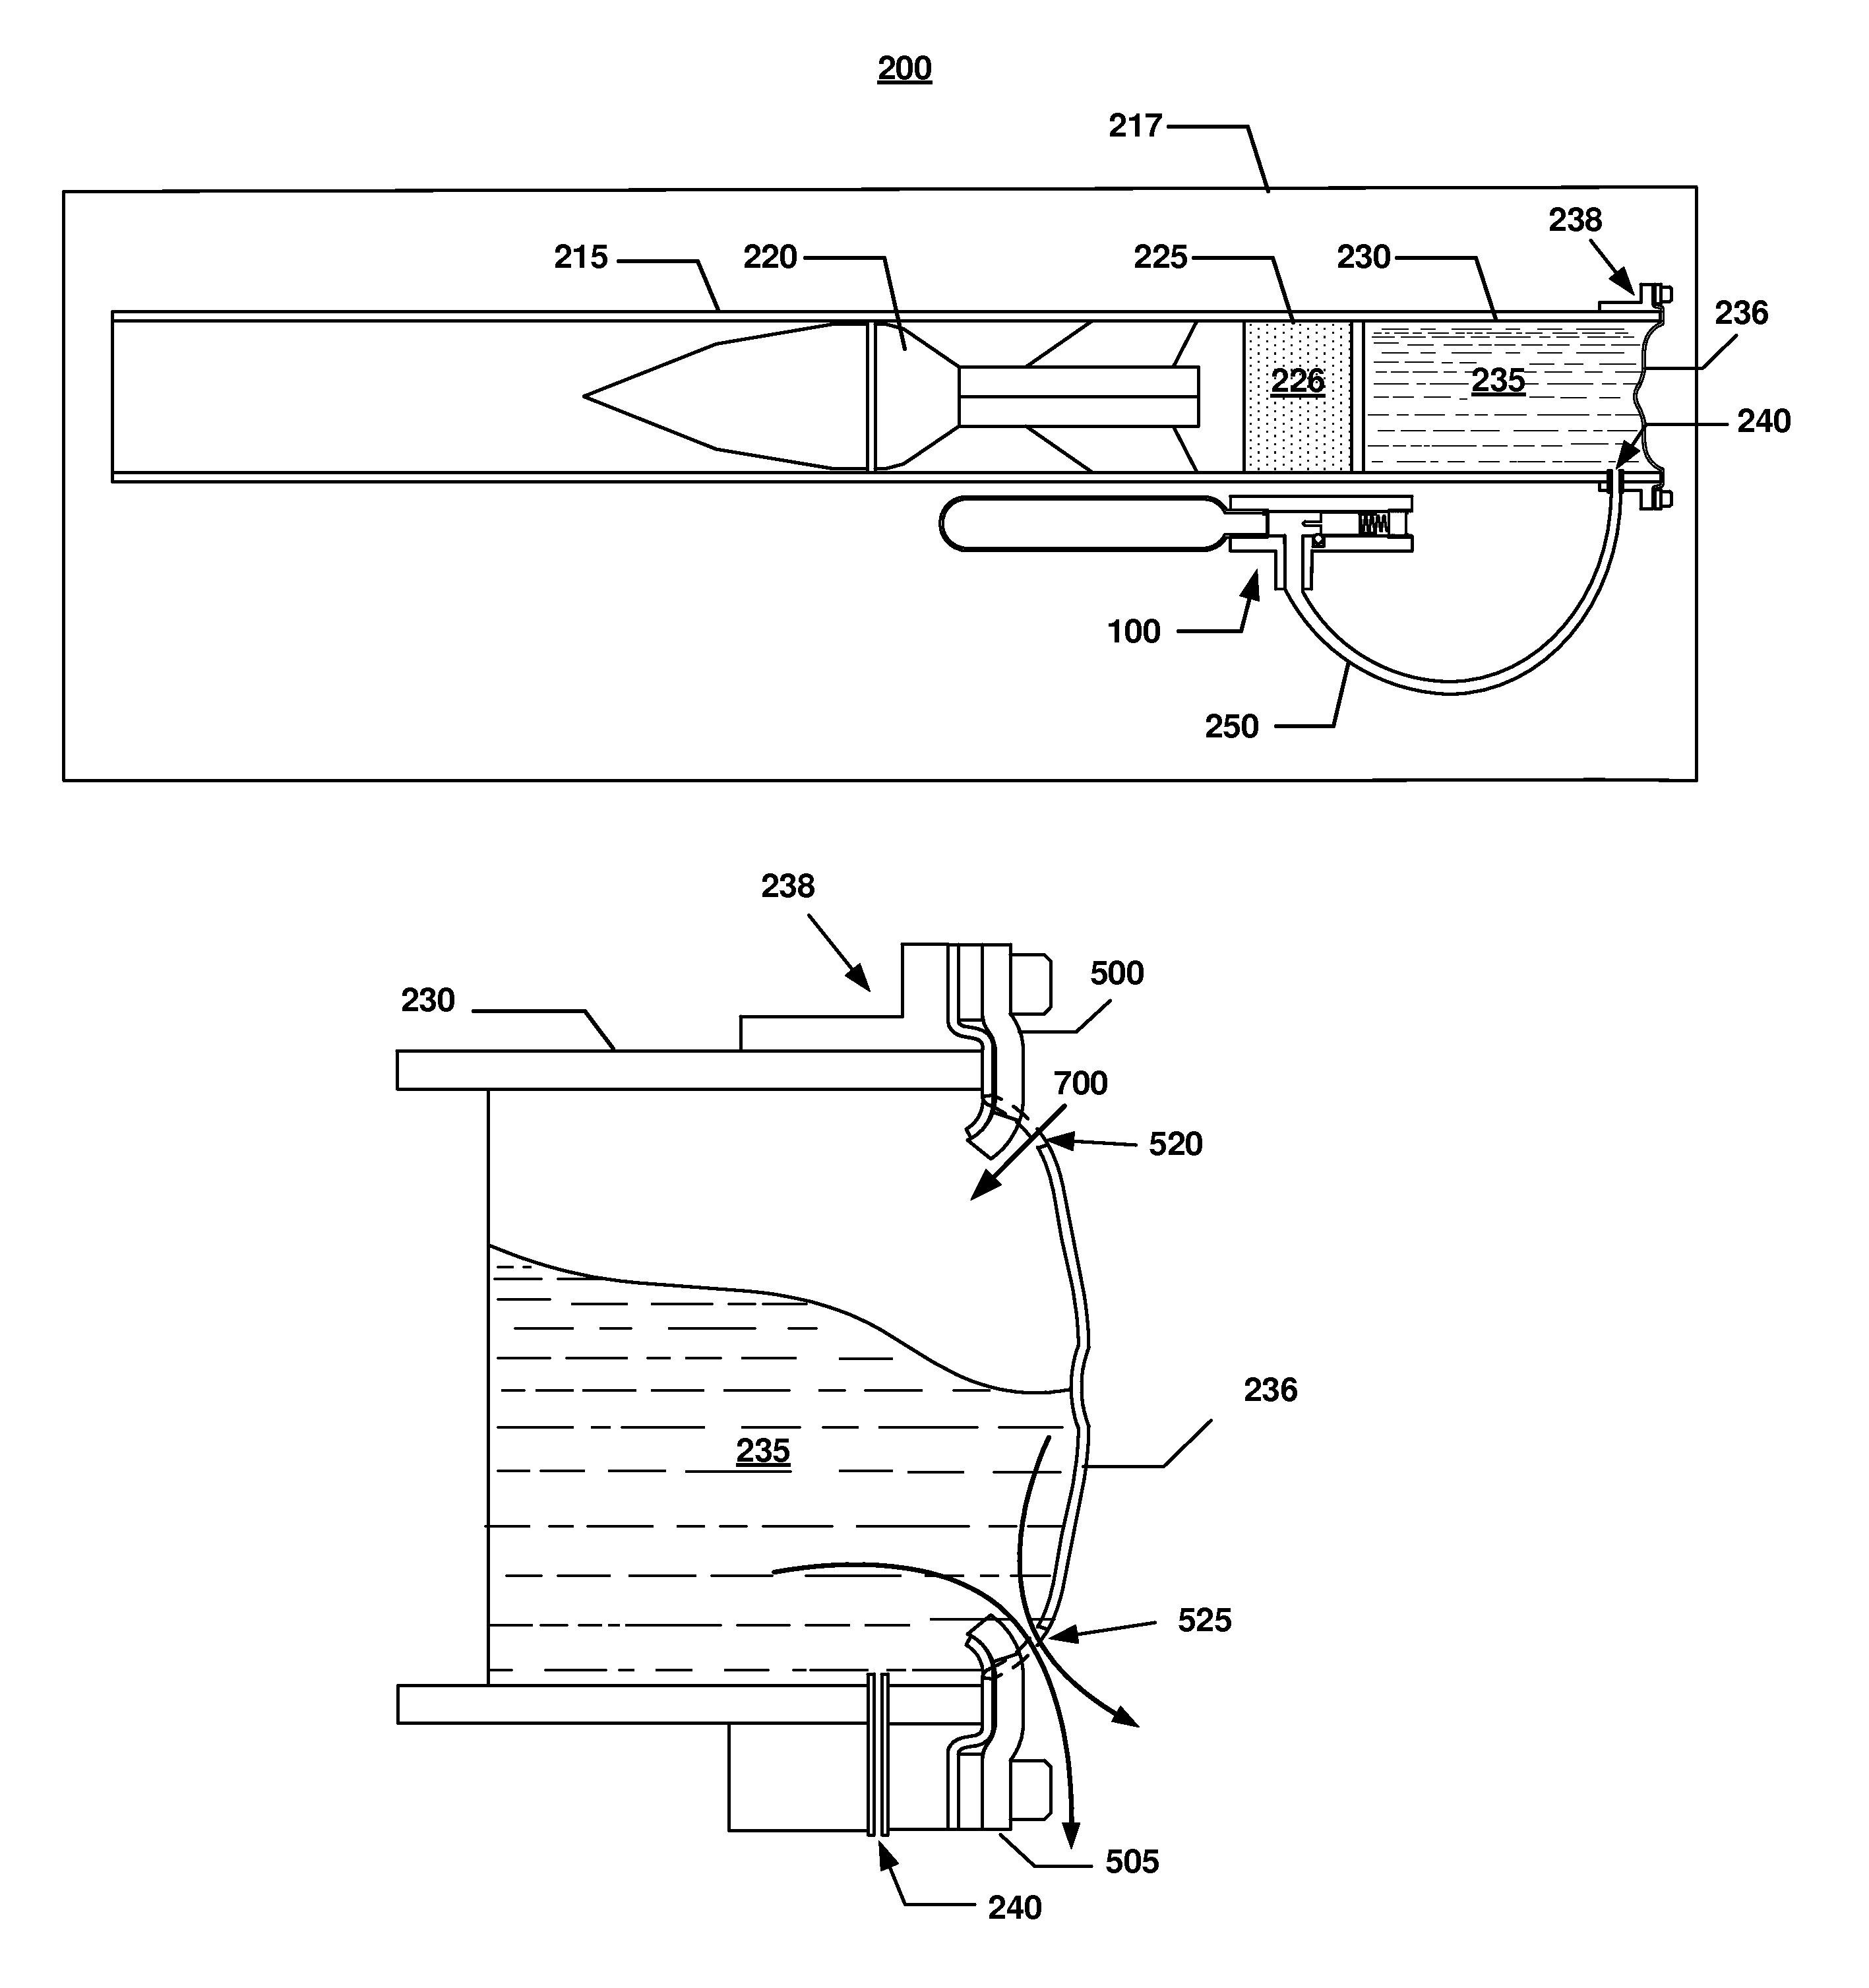 Bleeding mechanism for use in a propulsion system of a recoilless, insensitive munition